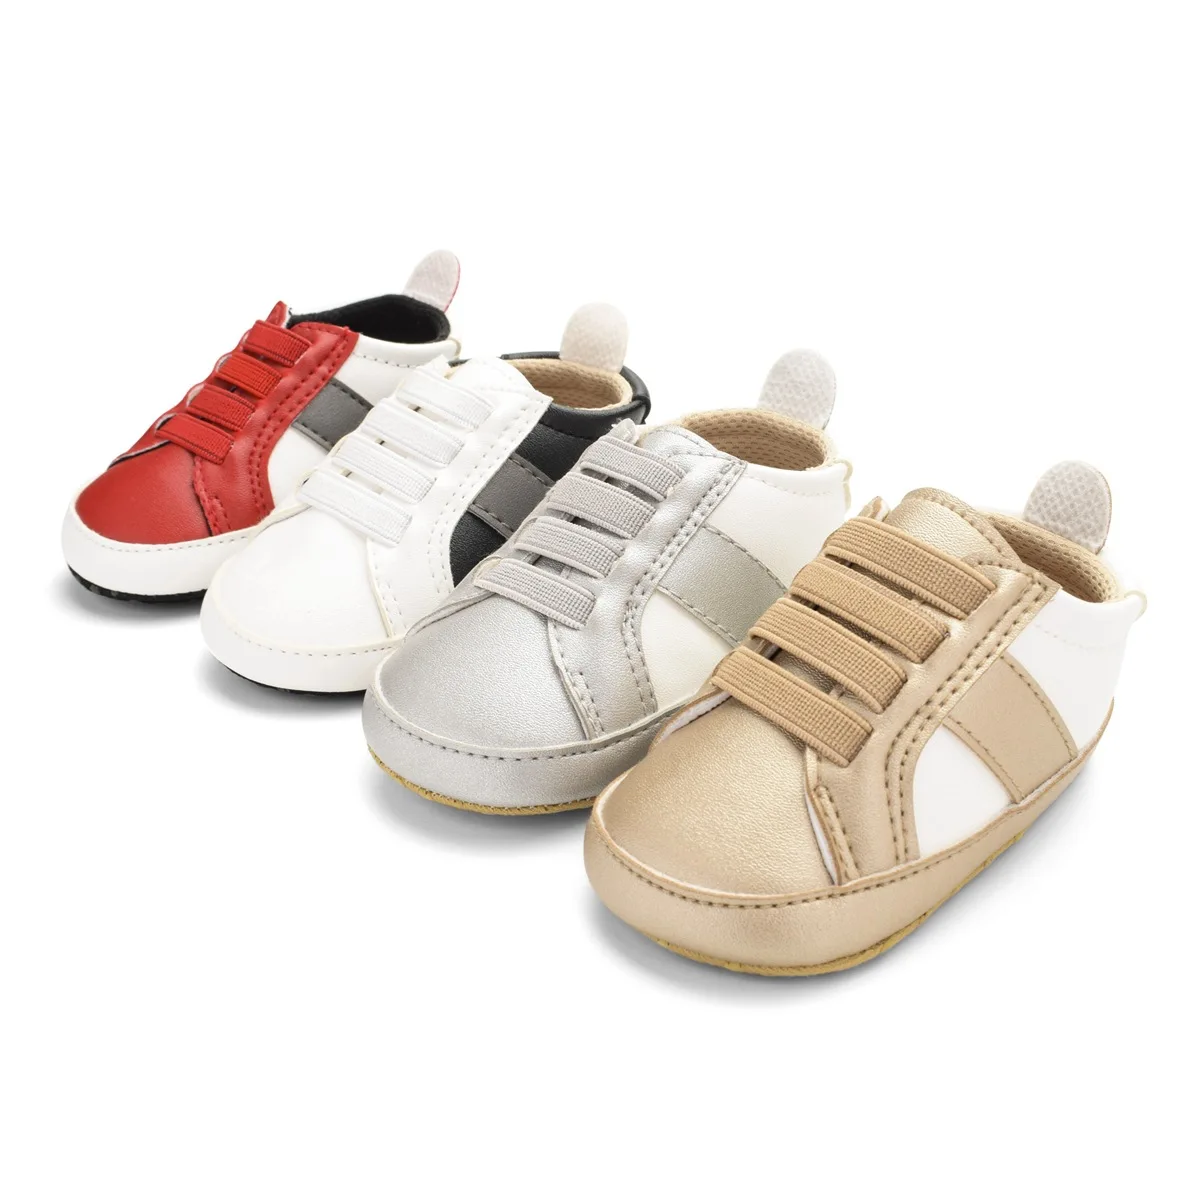 Newborn Toddler Baby Boy Girl Soft Lovely Comfortable Sole Cotton Crib Shoes Casual Sneaker Sport Shoes Patchwork Shoes 0-18M